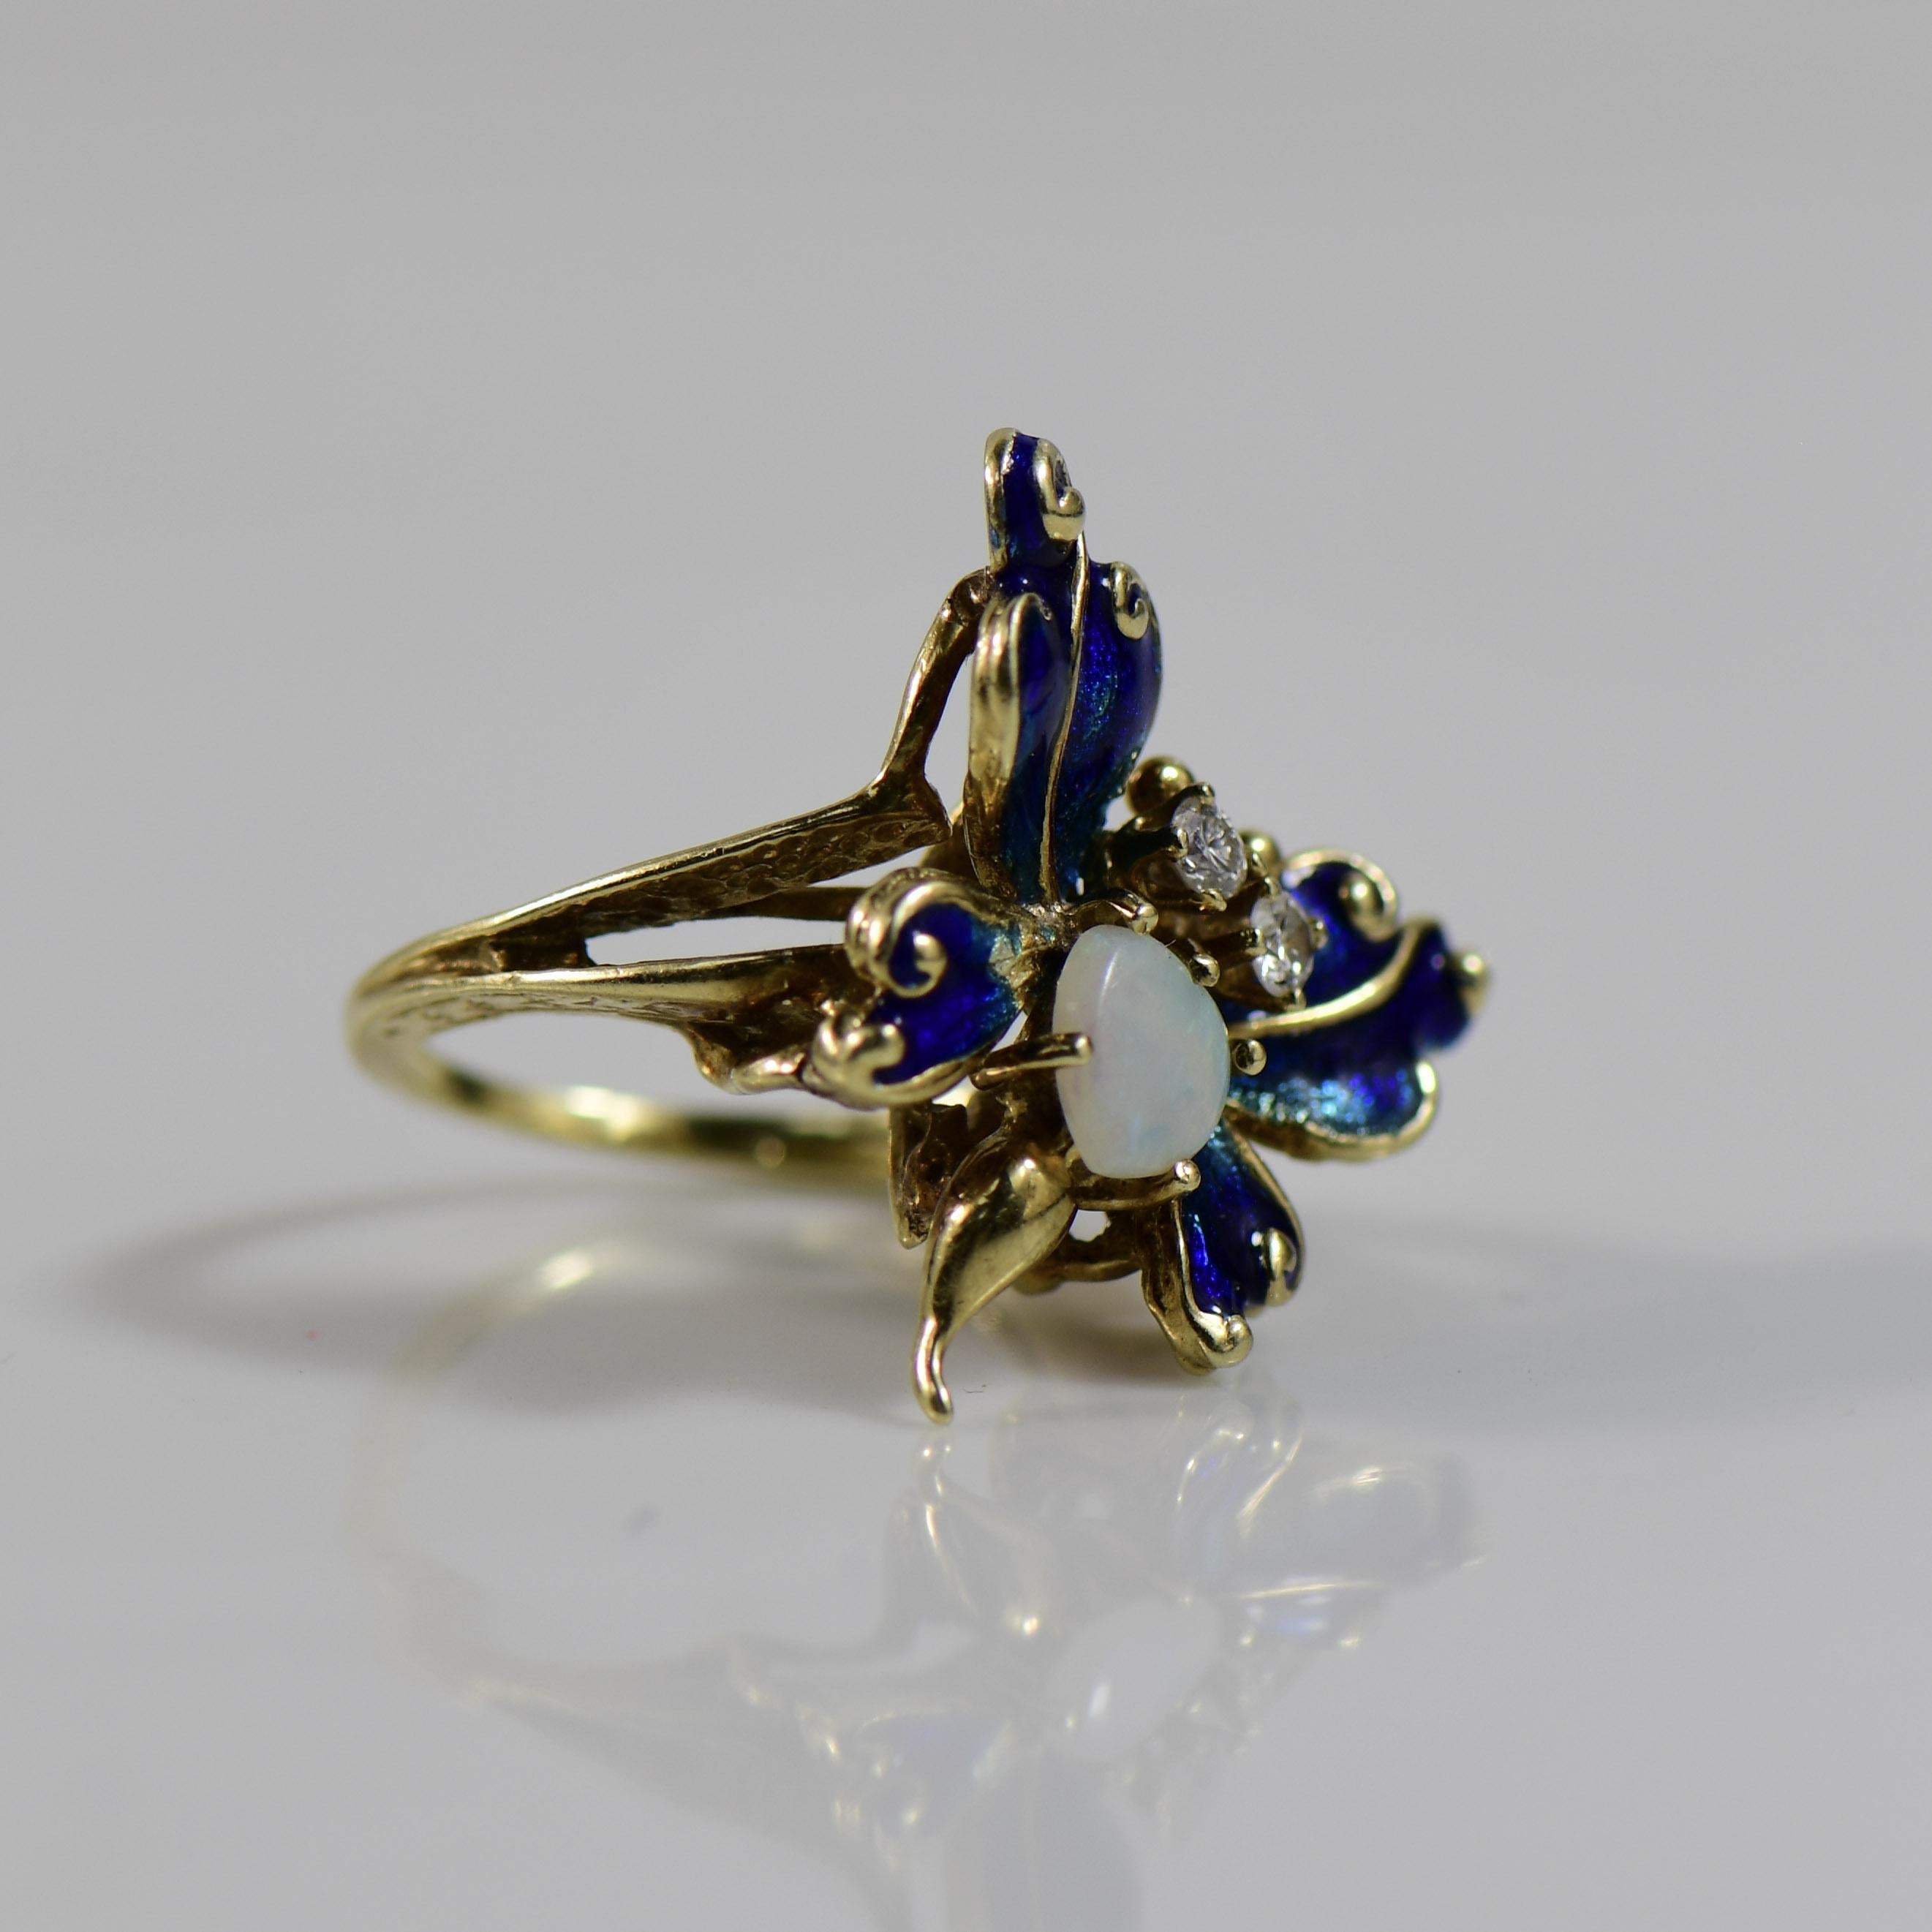 Adorn your fingers with whimsical charm through this vintage blue enamel butterfly ring, featuring a heart-cut opal center that radiates with ethereal hues. The delicate craftsmanship of the butterfly's wings, intricately adorned with blue enamel,